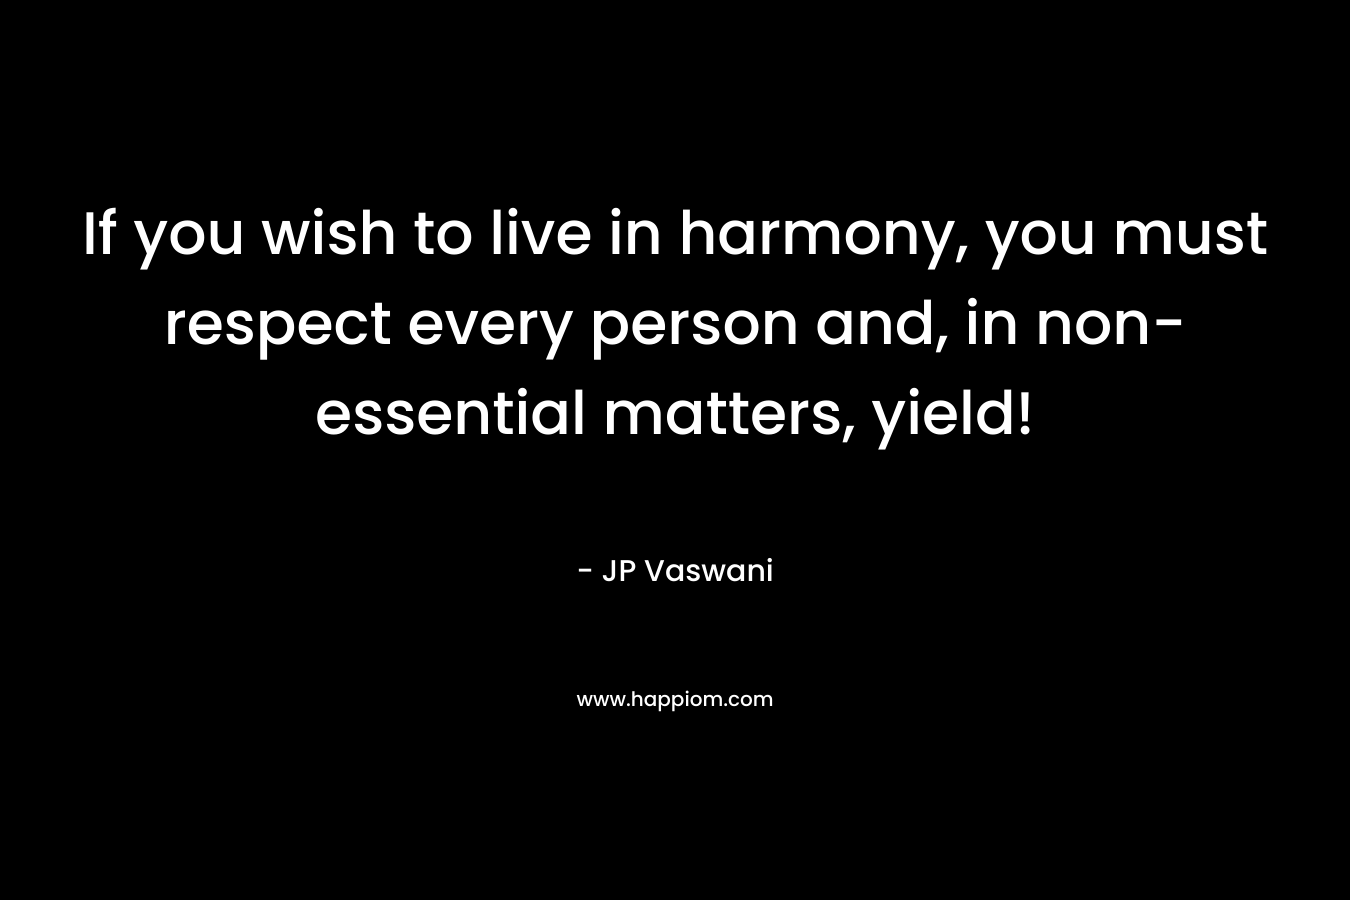 If you wish to live in harmony, you must respect every person and, in non-essential matters, yield!